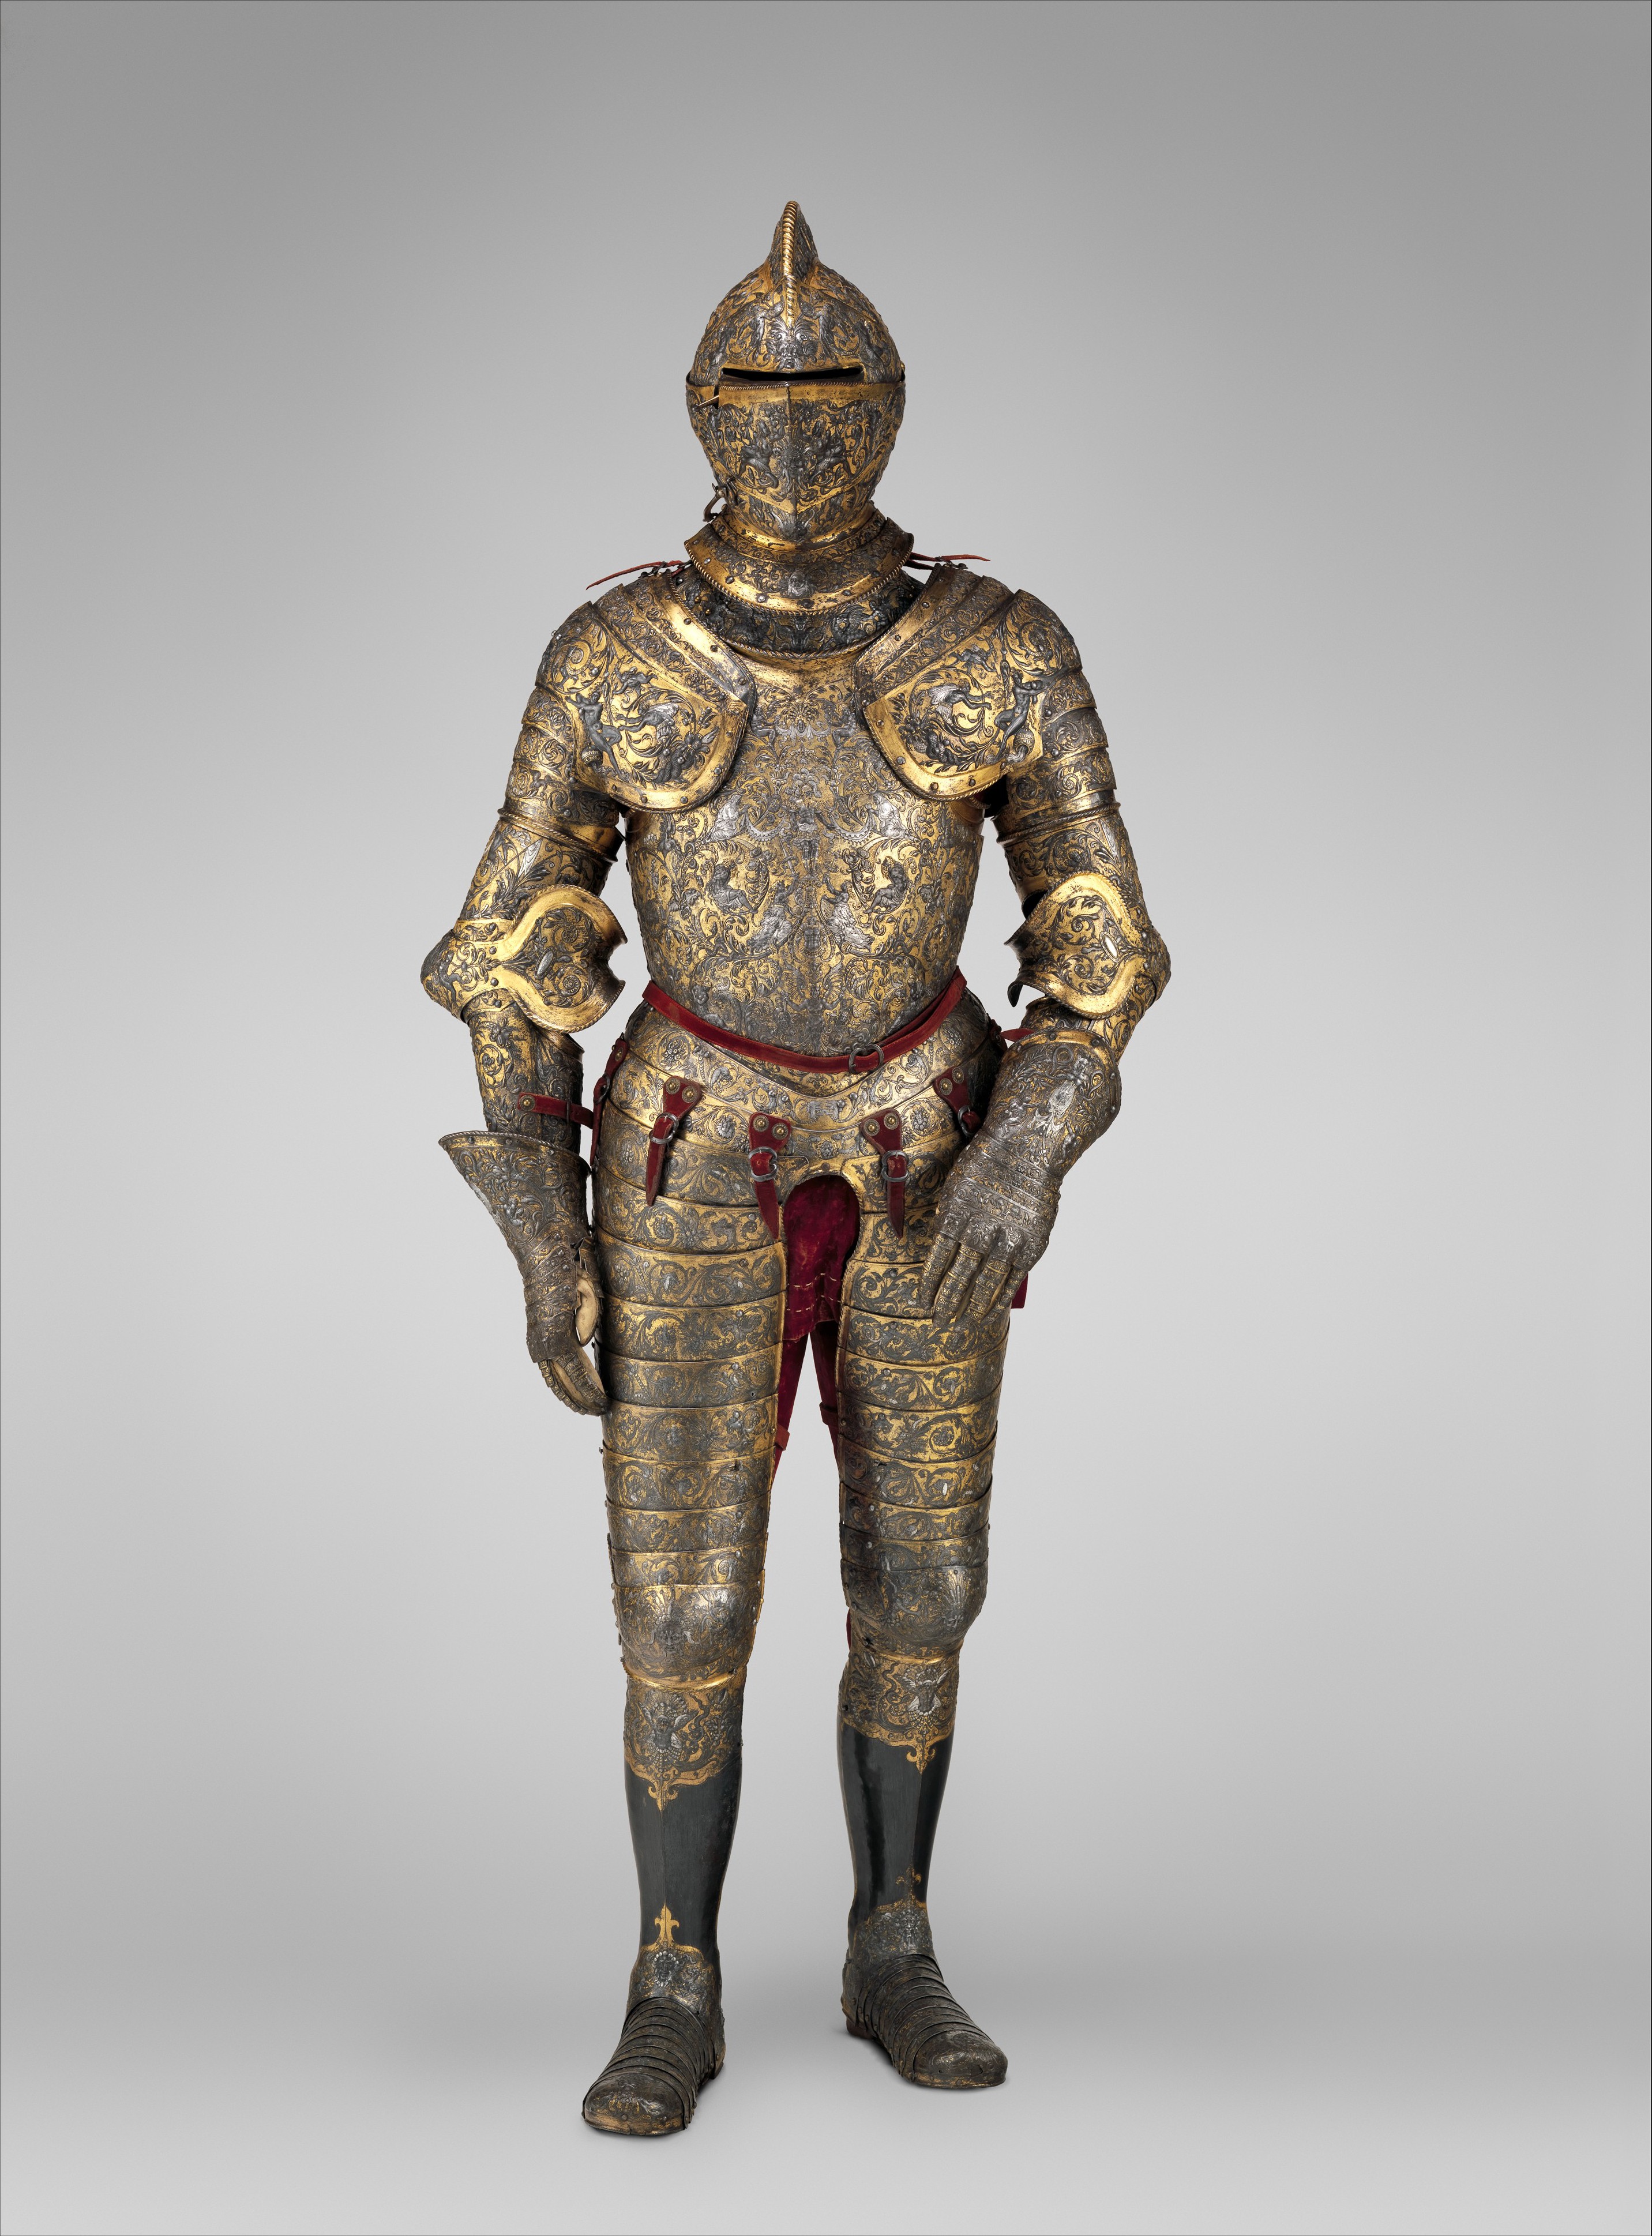 Armor of Henry II, King of France by Jean Cousin le Vieux - ca. 1555 - 187.96 cm, 24.20 kg Metropolitan Museum of Art